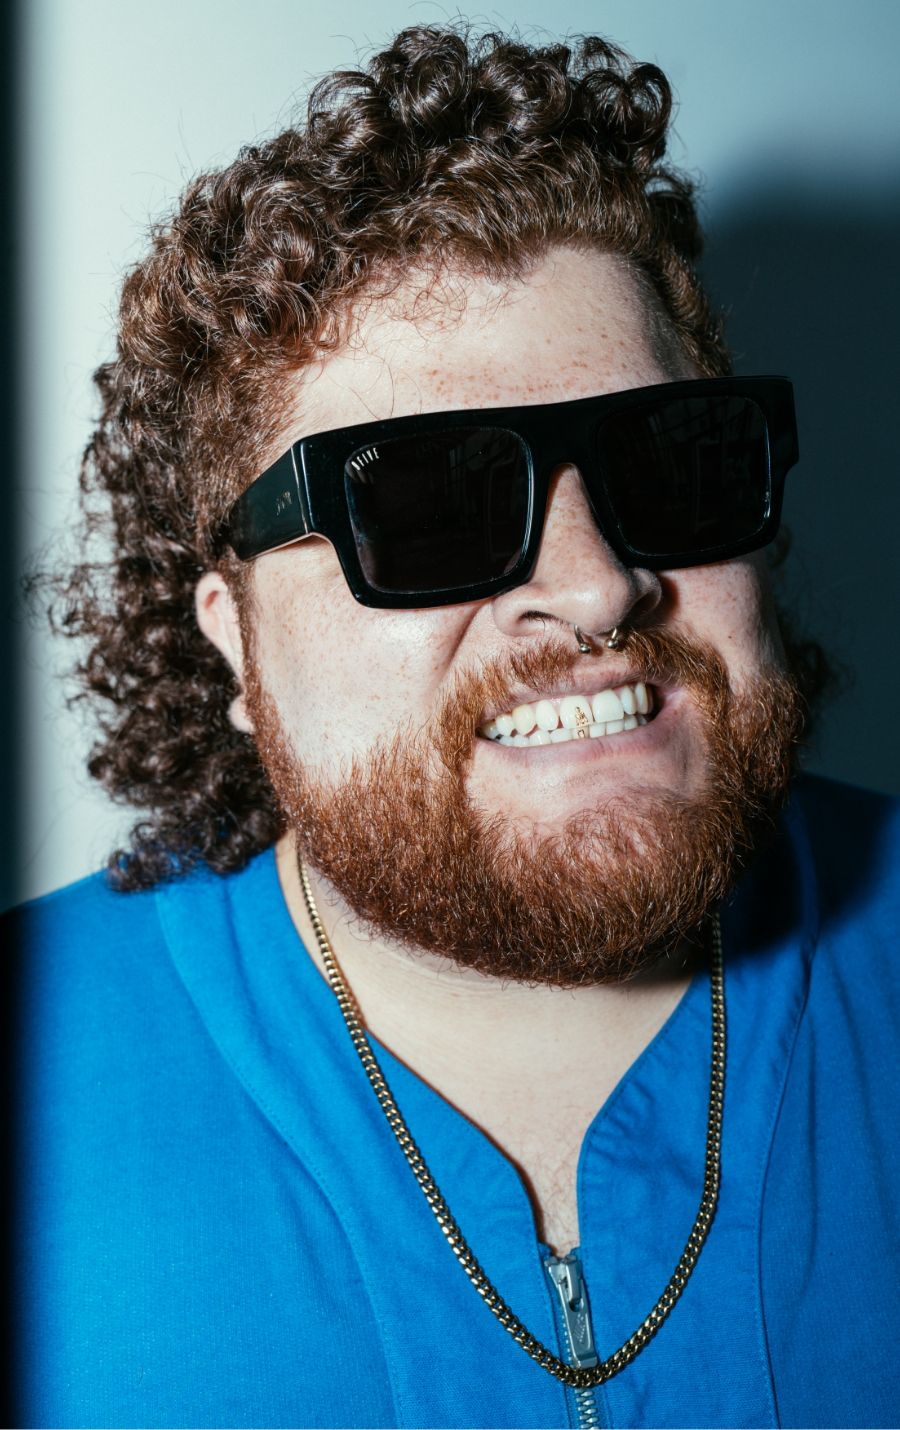 Close-up of a smiling man with curly hair and beard, wearing large black sunglasses and a blue shirt.